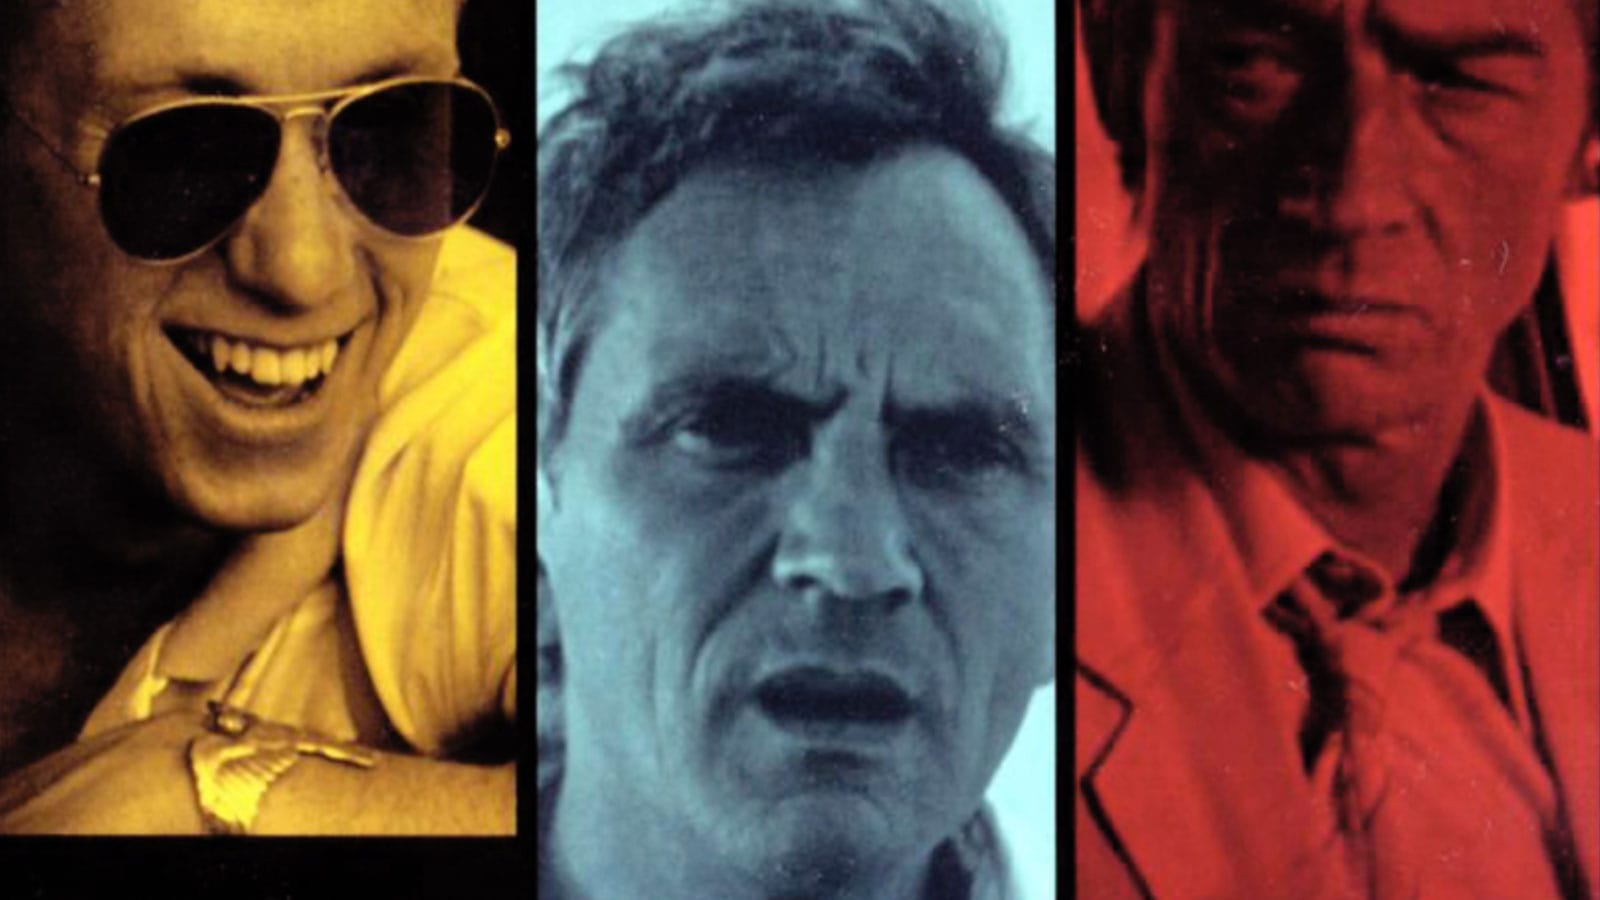 Detail of VHS cover image from The Hit (1984) shows filtered images of Tim Roth in aviator sunglasses (yellow), a concerned Terence Stamp (blue), and a grim John Hurt (red)